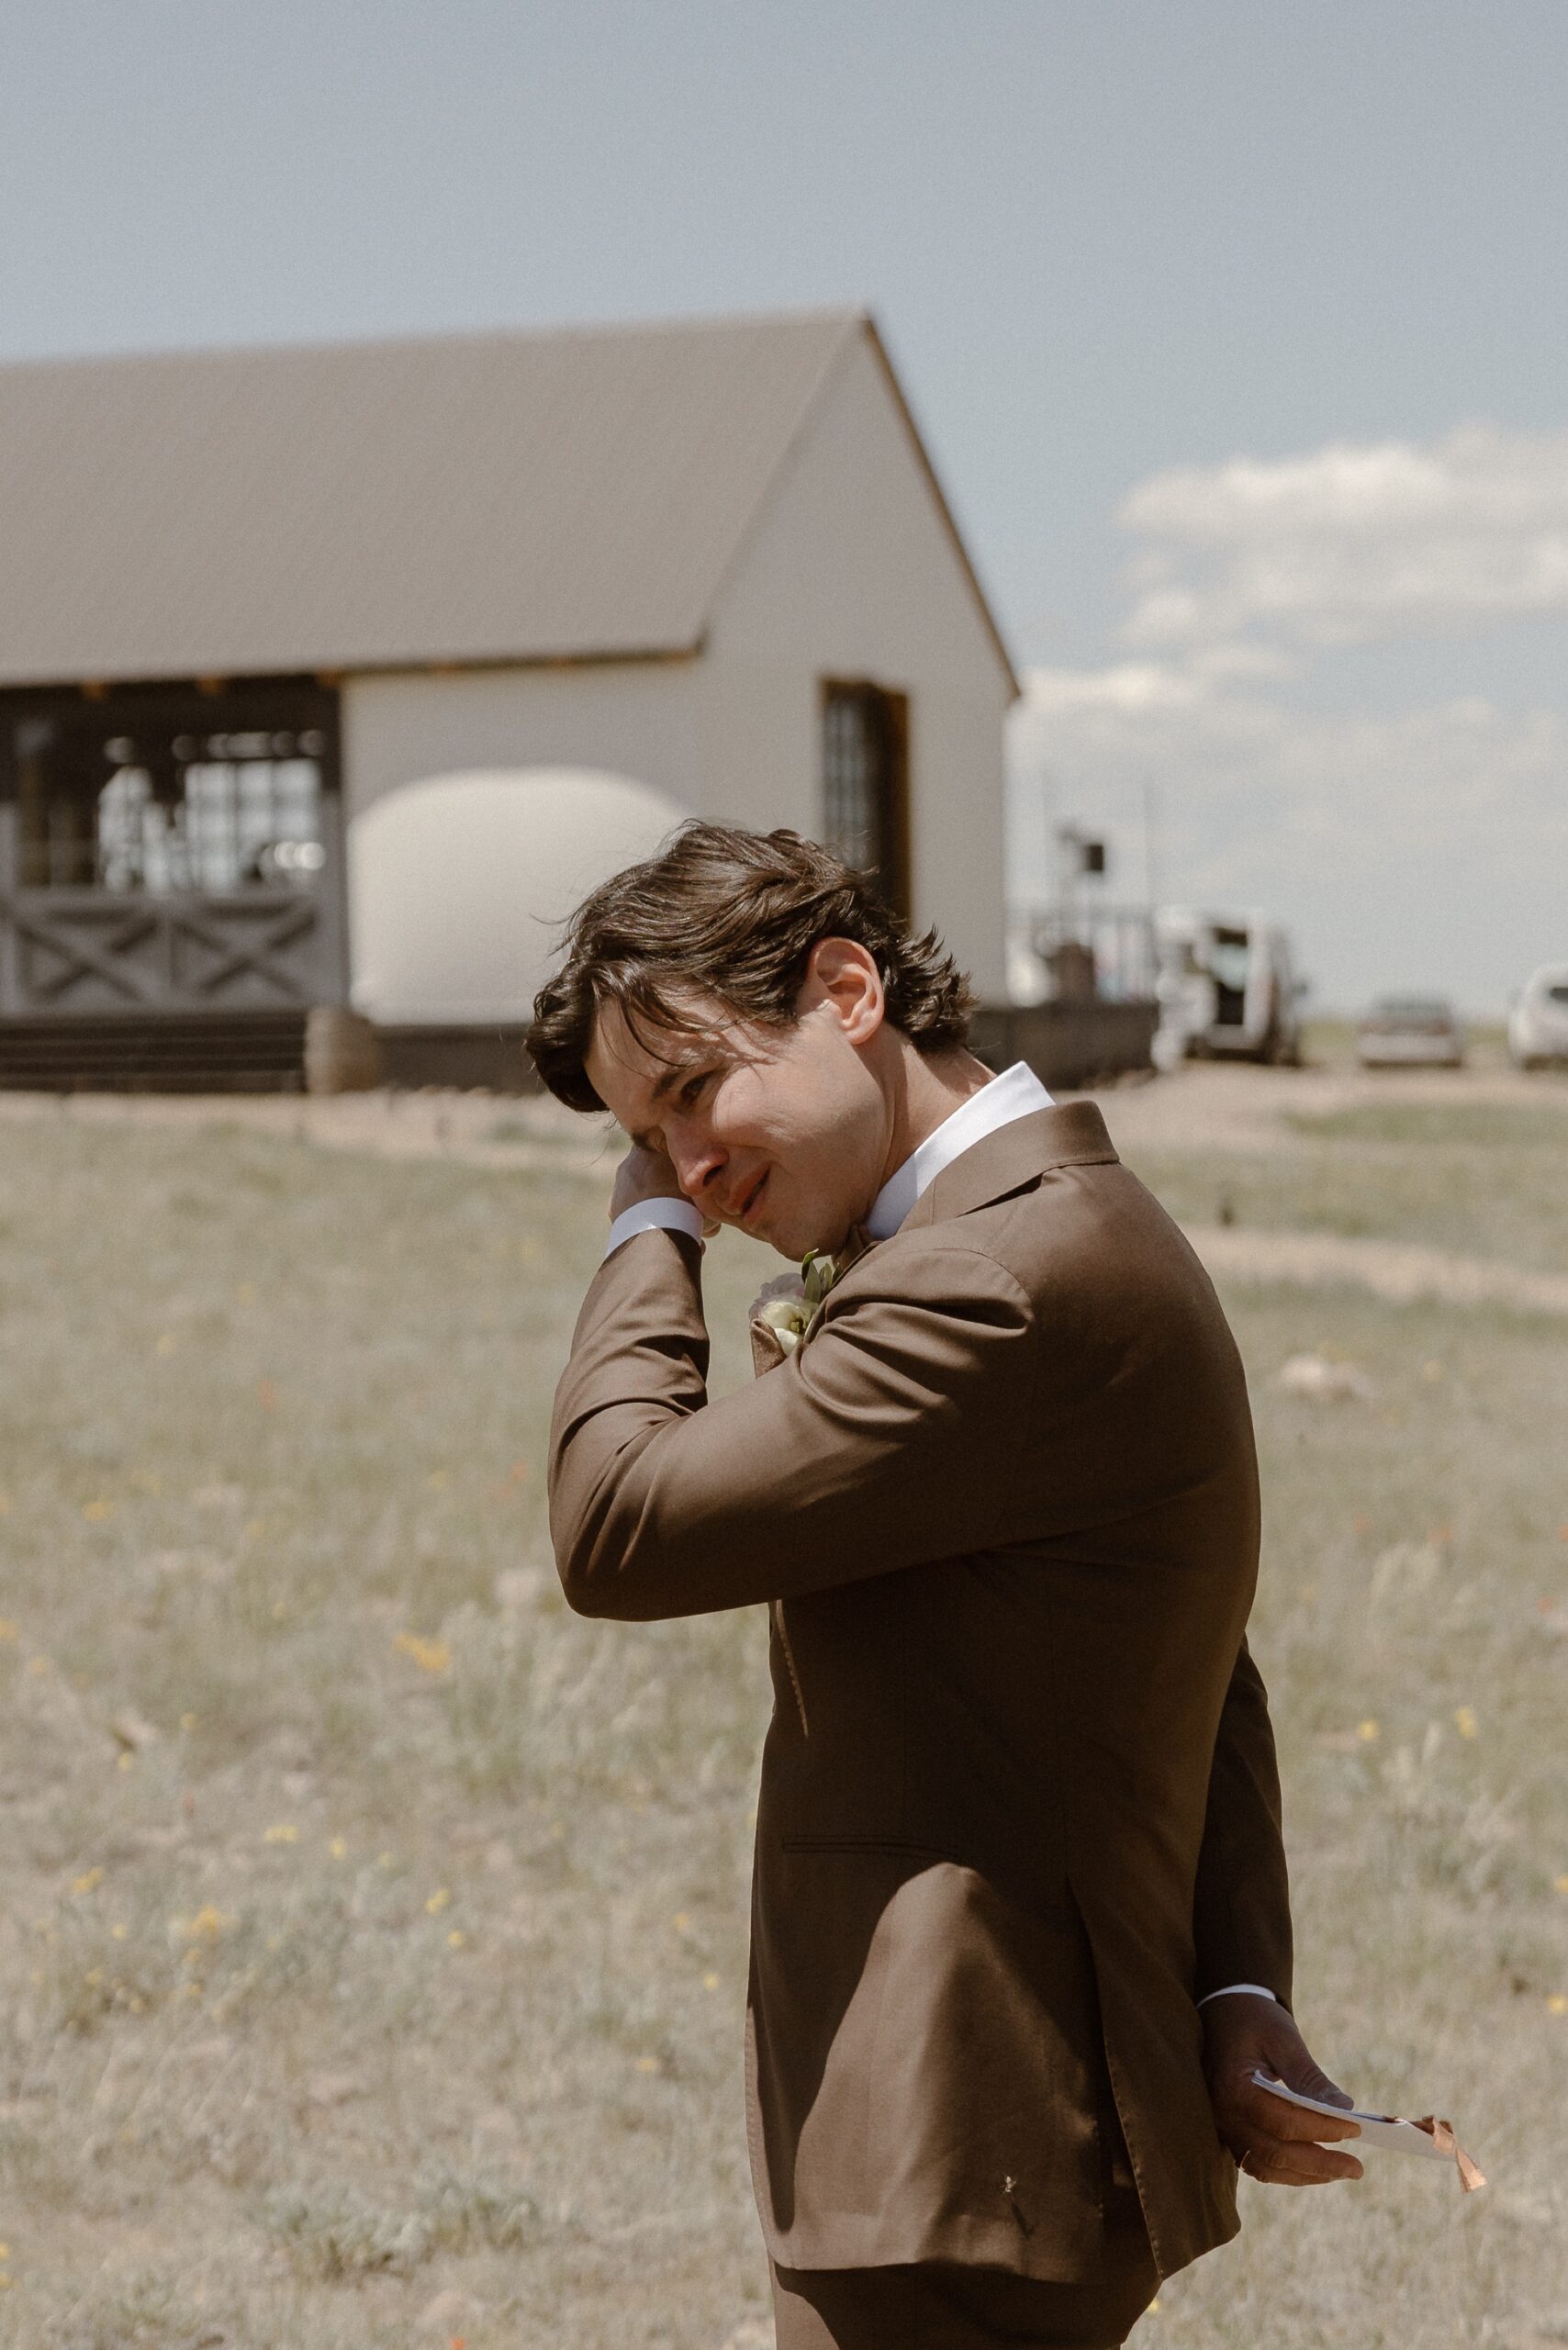 A groom wipes his eyes as he cries upon seeing his bride. Photo by Colorado wedding photographer Ashley Joyce.